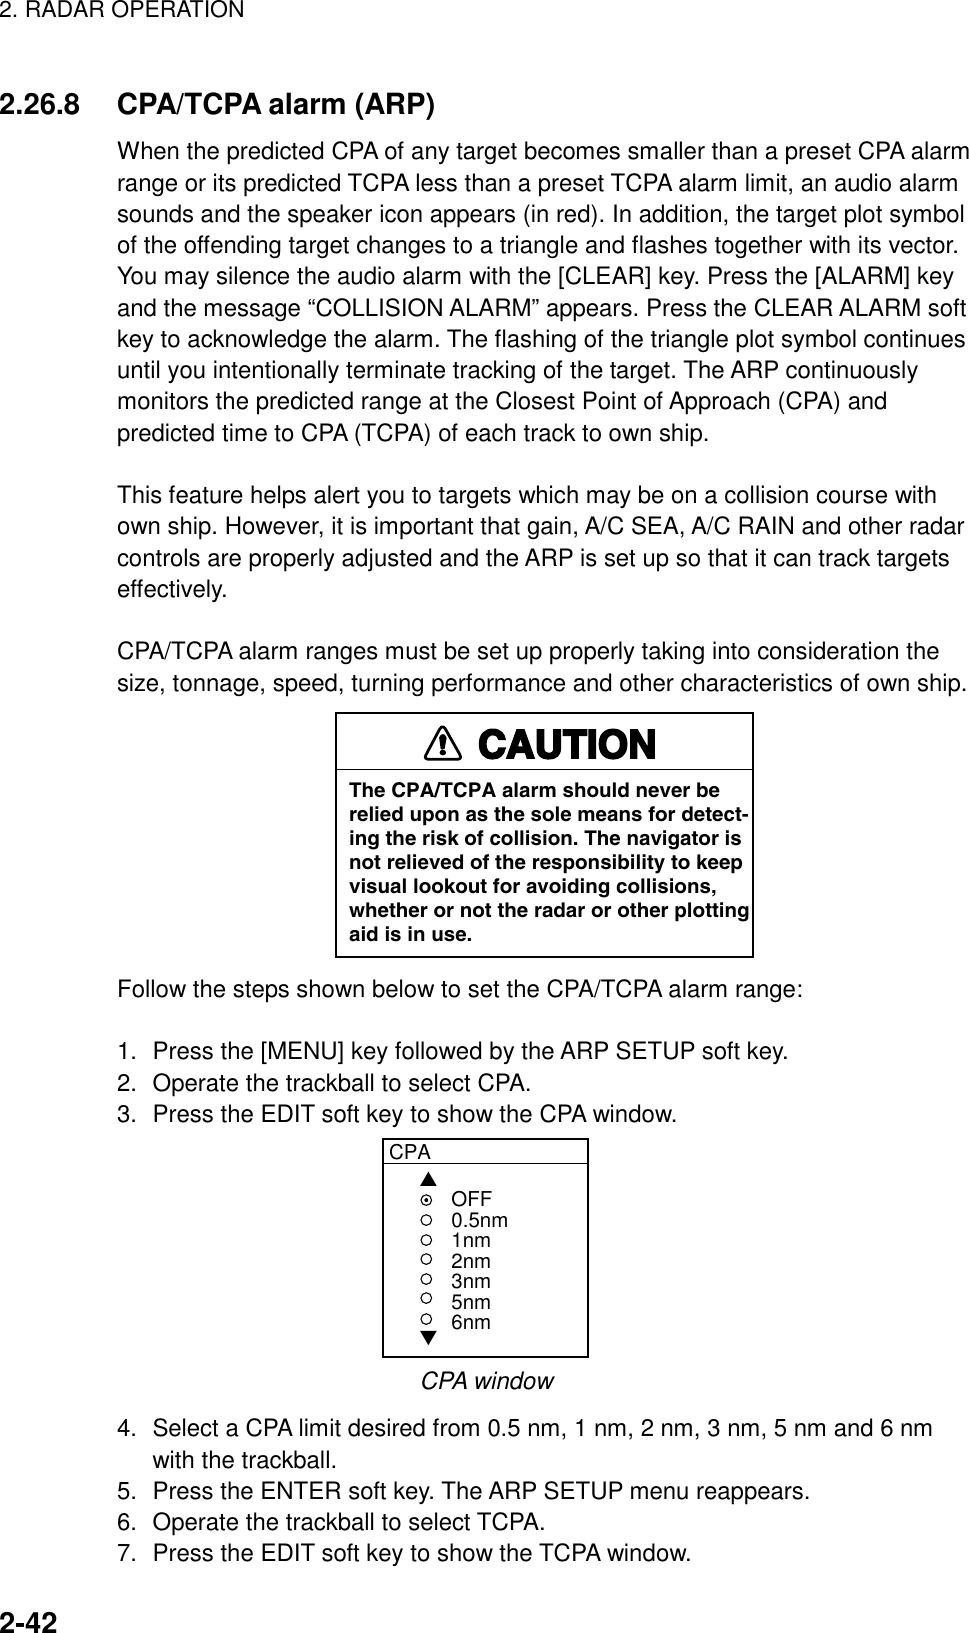 2. RADAR OPERATION    2-422.26.8  CPA/TCPA alarm (ARP) When the predicted CPA of any target becomes smaller than a preset CPA alarm range or its predicted TCPA less than a preset TCPA alarm limit, an audio alarm sounds and the speaker icon appears (in red). In addition, the target plot symbol of the offending target changes to a triangle and flashes together with its vector. You may silence the audio alarm with the [CLEAR] key. Press the [ALARM] key and the message “COLLISION ALARM” appears. Press the CLEAR ALARM soft key to acknowledge the alarm. The flashing of the triangle plot symbol continues until you intentionally terminate tracking of the target. The ARP continuously monitors the predicted range at the Closest Point of Approach (CPA) and predicted time to CPA (TCPA) of each track to own ship.  This feature helps alert you to targets which may be on a collision course with own ship. However, it is important that gain, A/C SEA, A/C RAIN and other radar controls are properly adjusted and the ARP is set up so that it can track targets effectively.  CPA/TCPA alarm ranges must be set up properly taking into consideration the size, tonnage, speed, turning performance and other characteristics of own ship. CAUTIONThe CPA/TCPA alarm should never berelied upon as the sole means for detect-ing the risk of collision. The navigator isnot relieved of the responsibility to keepvisual lookout for avoiding collisions,whether or not the radar or other plottingaid is in use. Follow the steps shown below to set the CPA/TCPA alarm range:  1.  Press the [MENU] key followed by the ARP SETUP soft key. 2.  Operate the trackball to select CPA. 3.  Press the EDIT soft key to show the CPA window. CPA▲▼OFF0.5nm1nm2nm3nm5nm6nm CPA window 4.  Select a CPA limit desired from 0.5 nm, 1 nm, 2 nm, 3 nm, 5 nm and 6 nm with the trackball. 5.  Press the ENTER soft key. The ARP SETUP menu reappears. 6.  Operate the trackball to select TCPA. 7.  Press the EDIT soft key to show the TCPA window. 